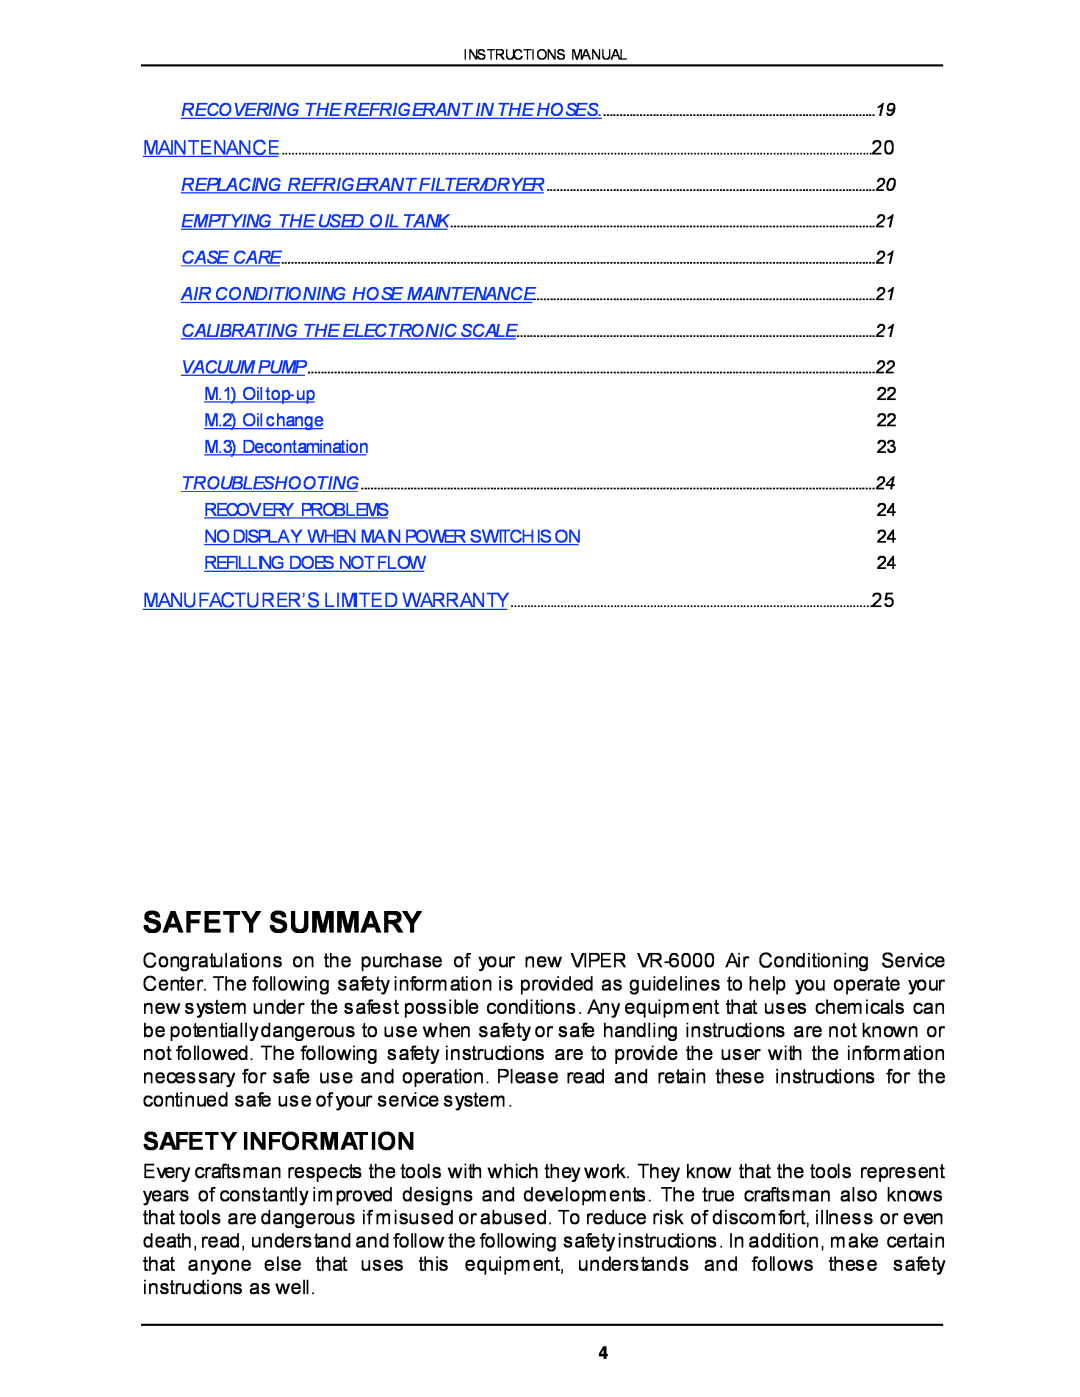 Viper VR-6000 owner manual Safety Summary, Safety Information 